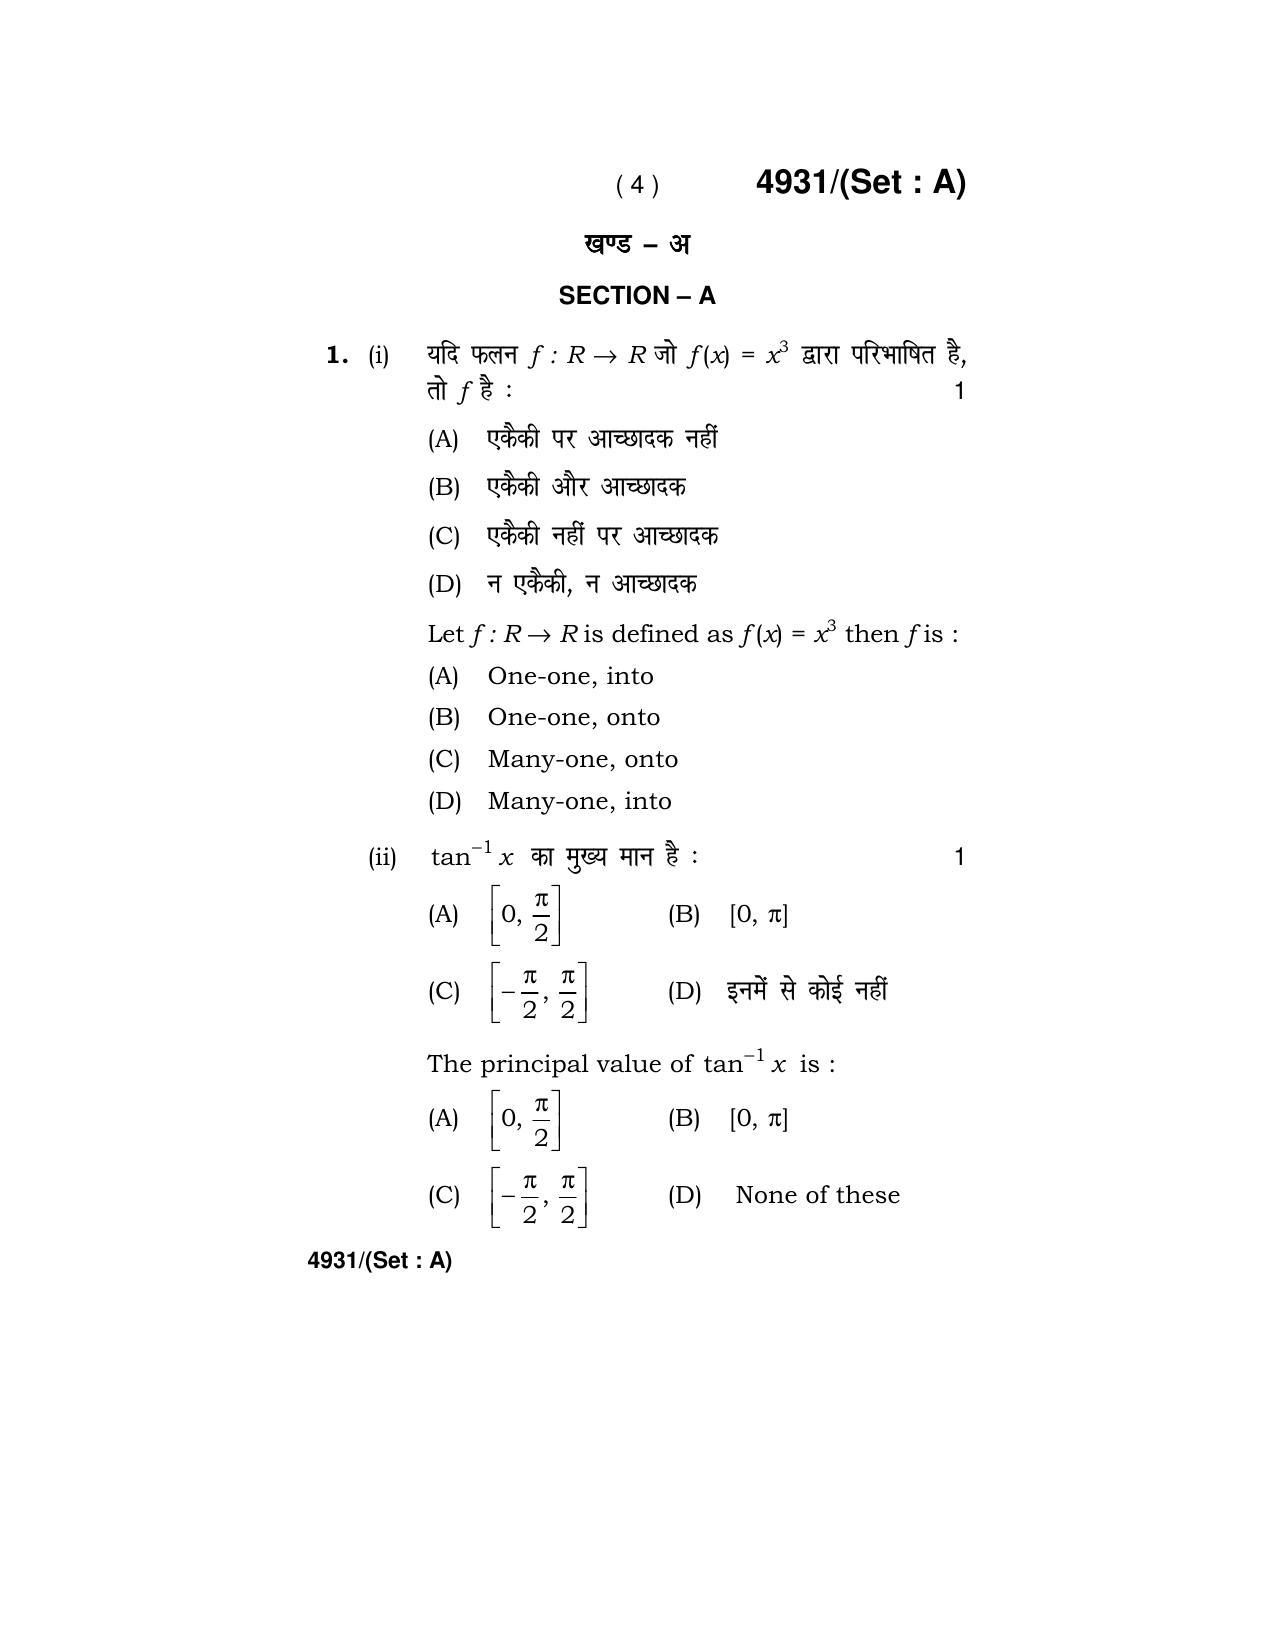 Haryana Board HBSE Class 12 Mathematics 2020 Question Paper - Page 4